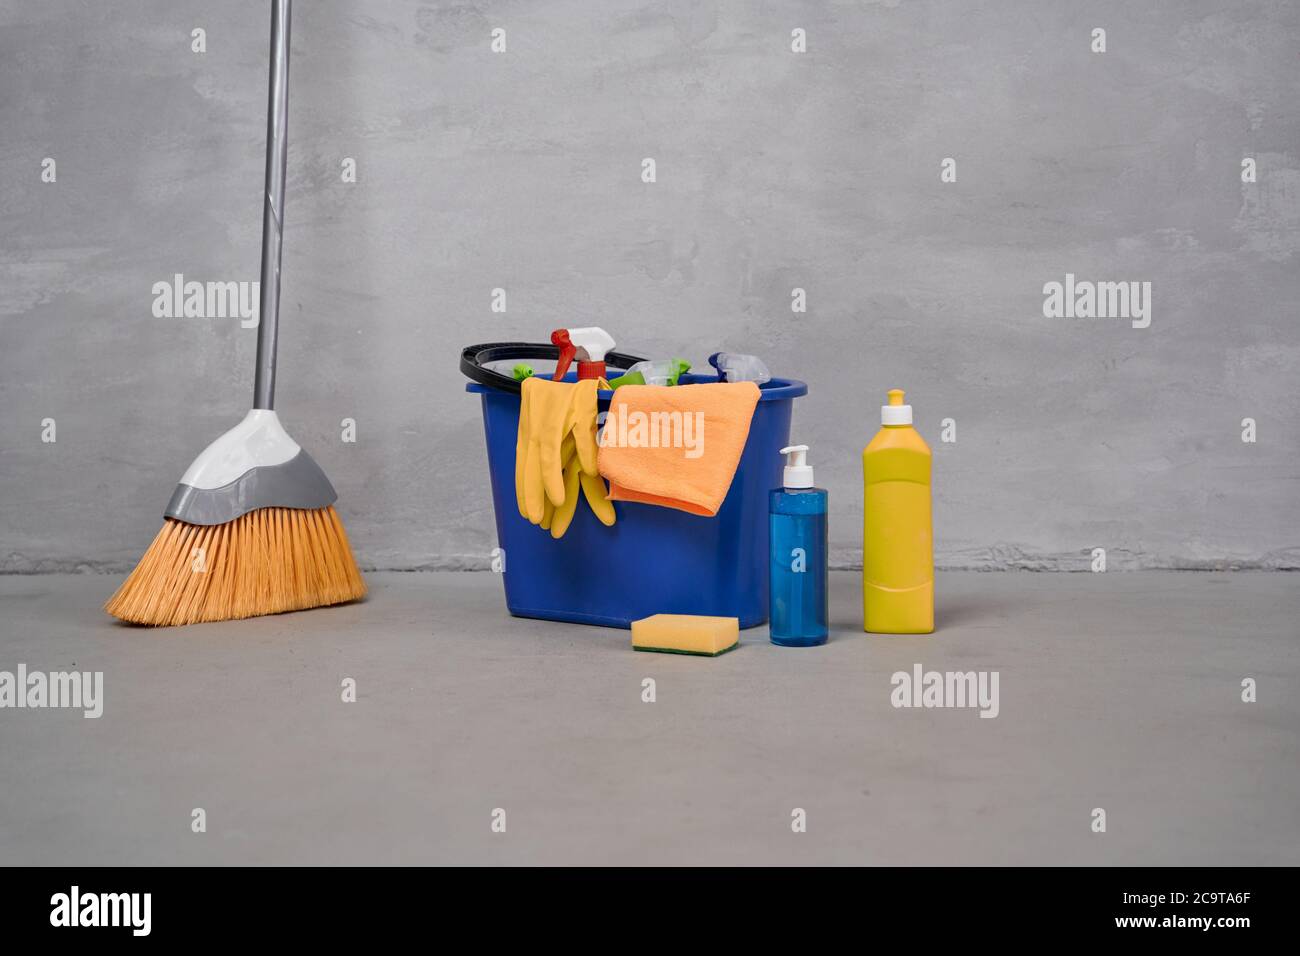 Cleaning supplies. Broom and plastic bucket or basket with cleaning products, bottles with detergents standing on the floor against grey wall. Housework, cleaning, housekeeping concept. Disinfection Stock Photo